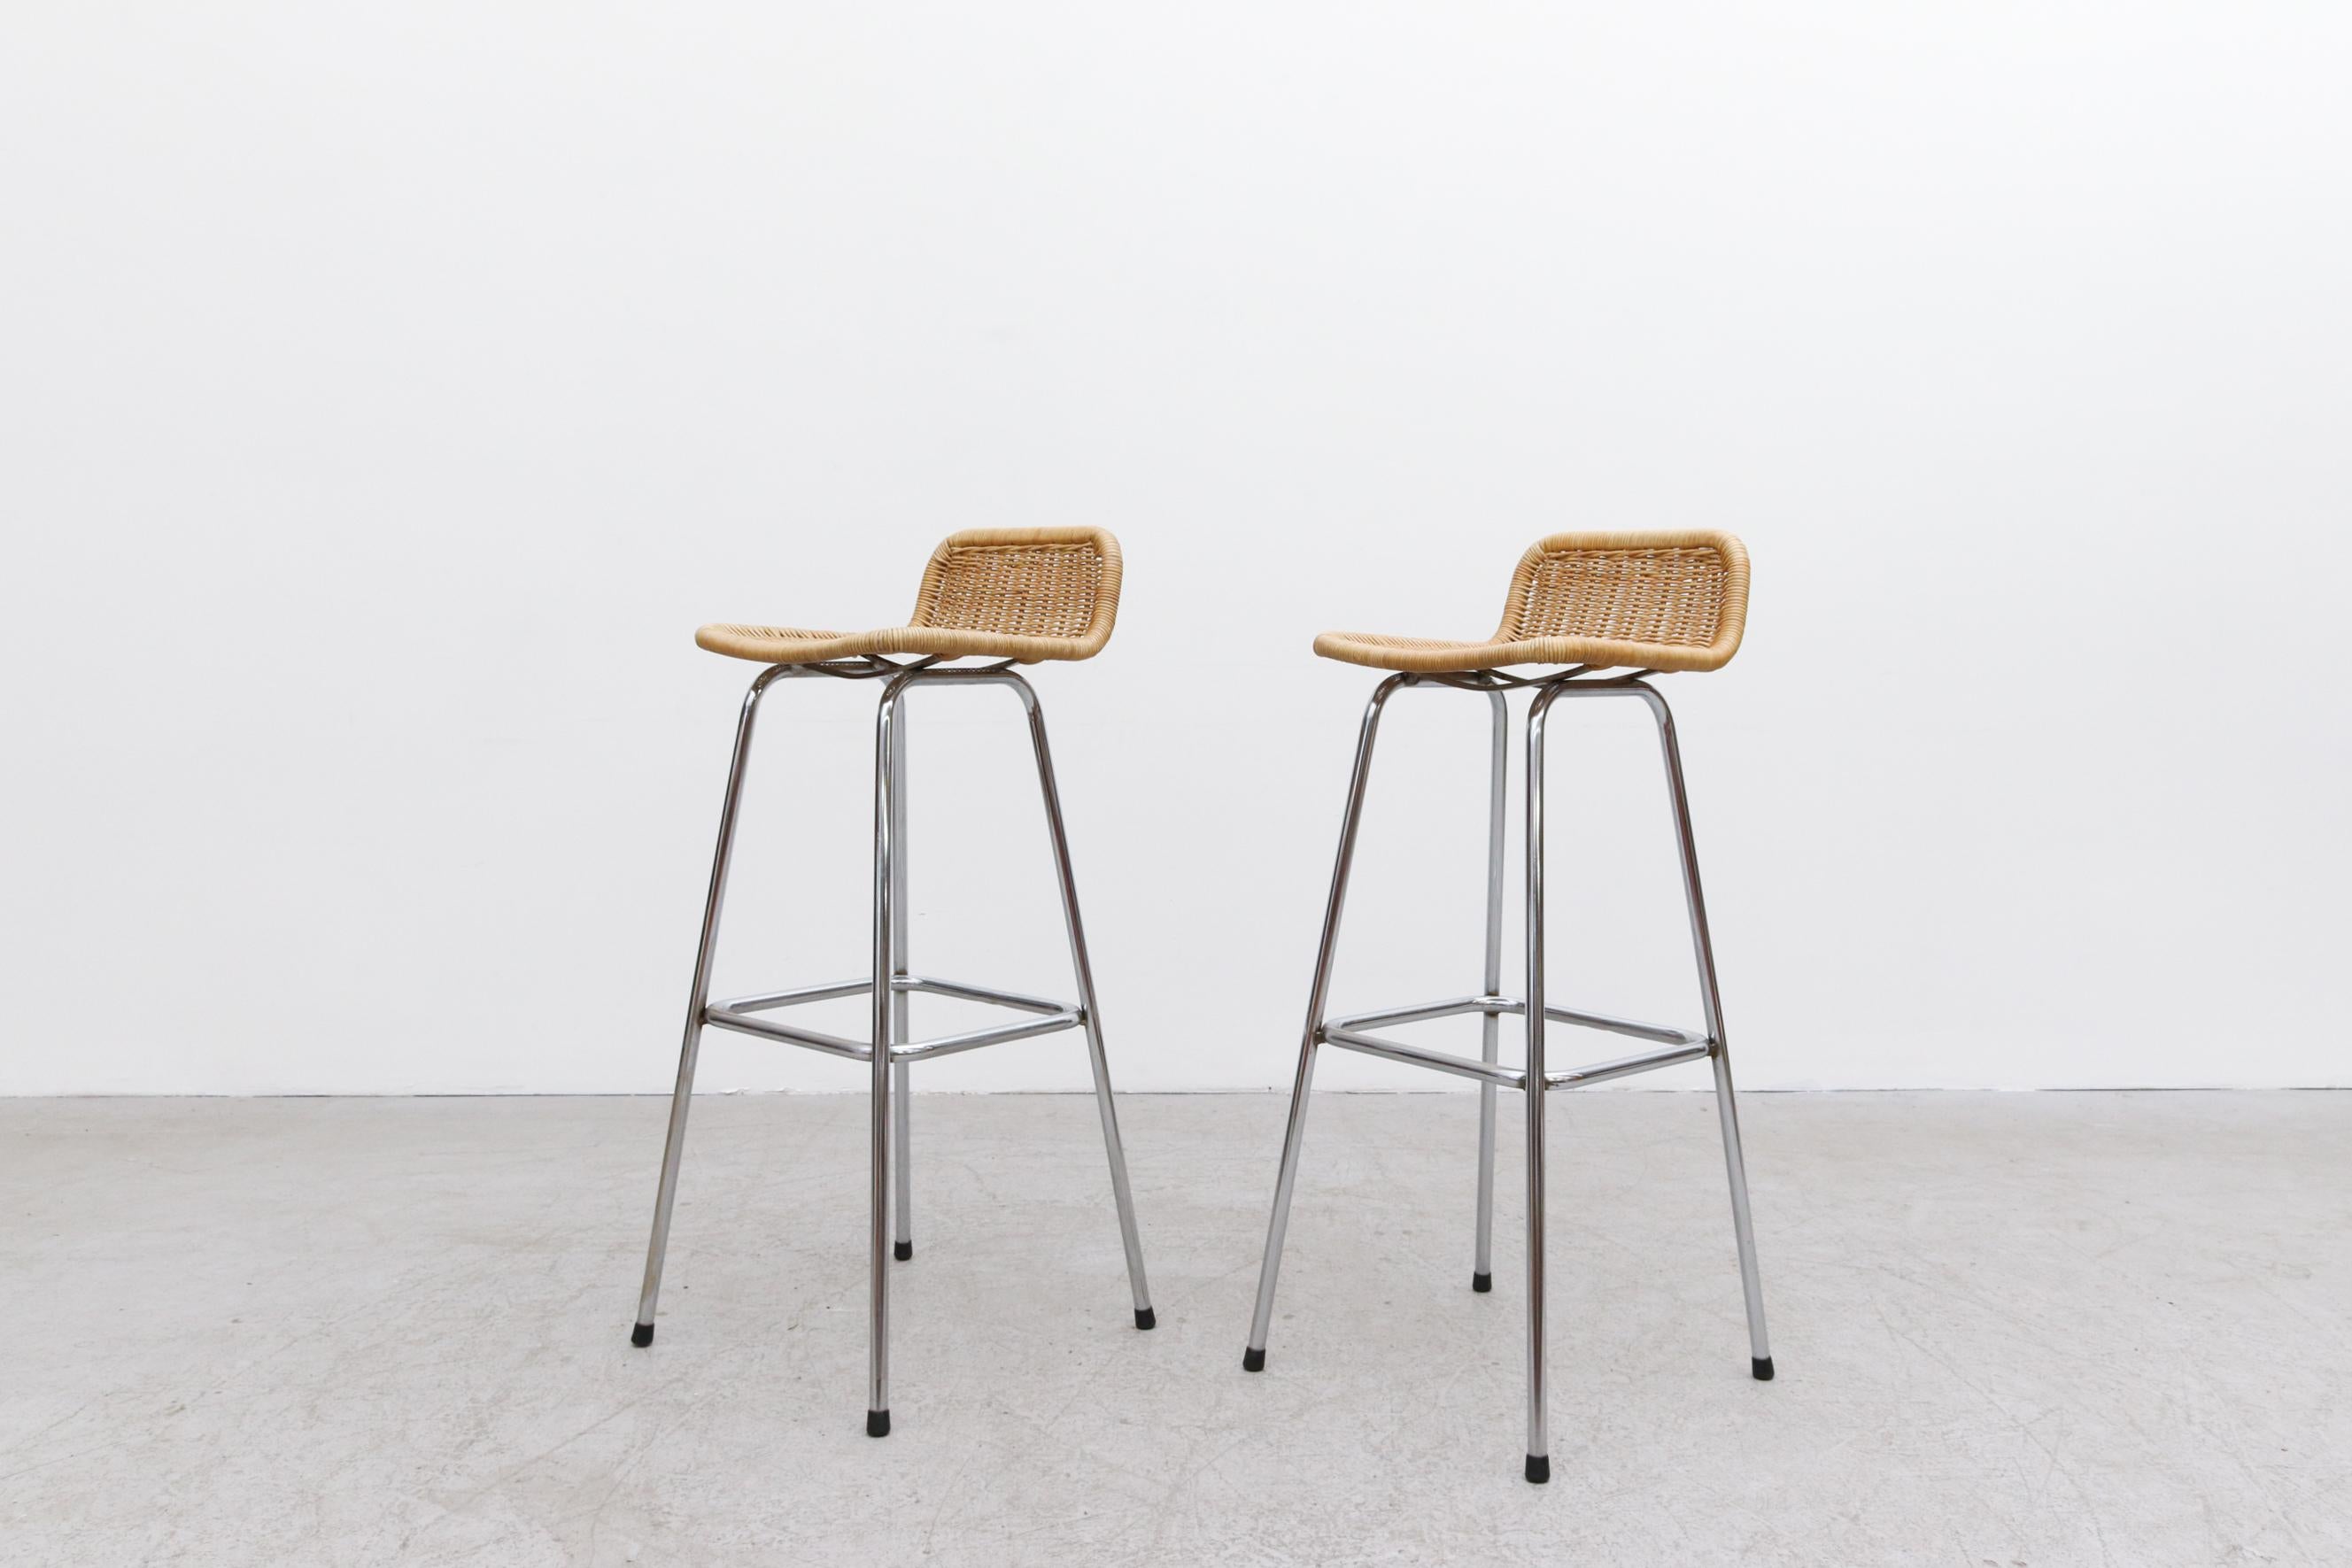 Woven Pair of Charlotte Perriand Style Wicker Bar Stools